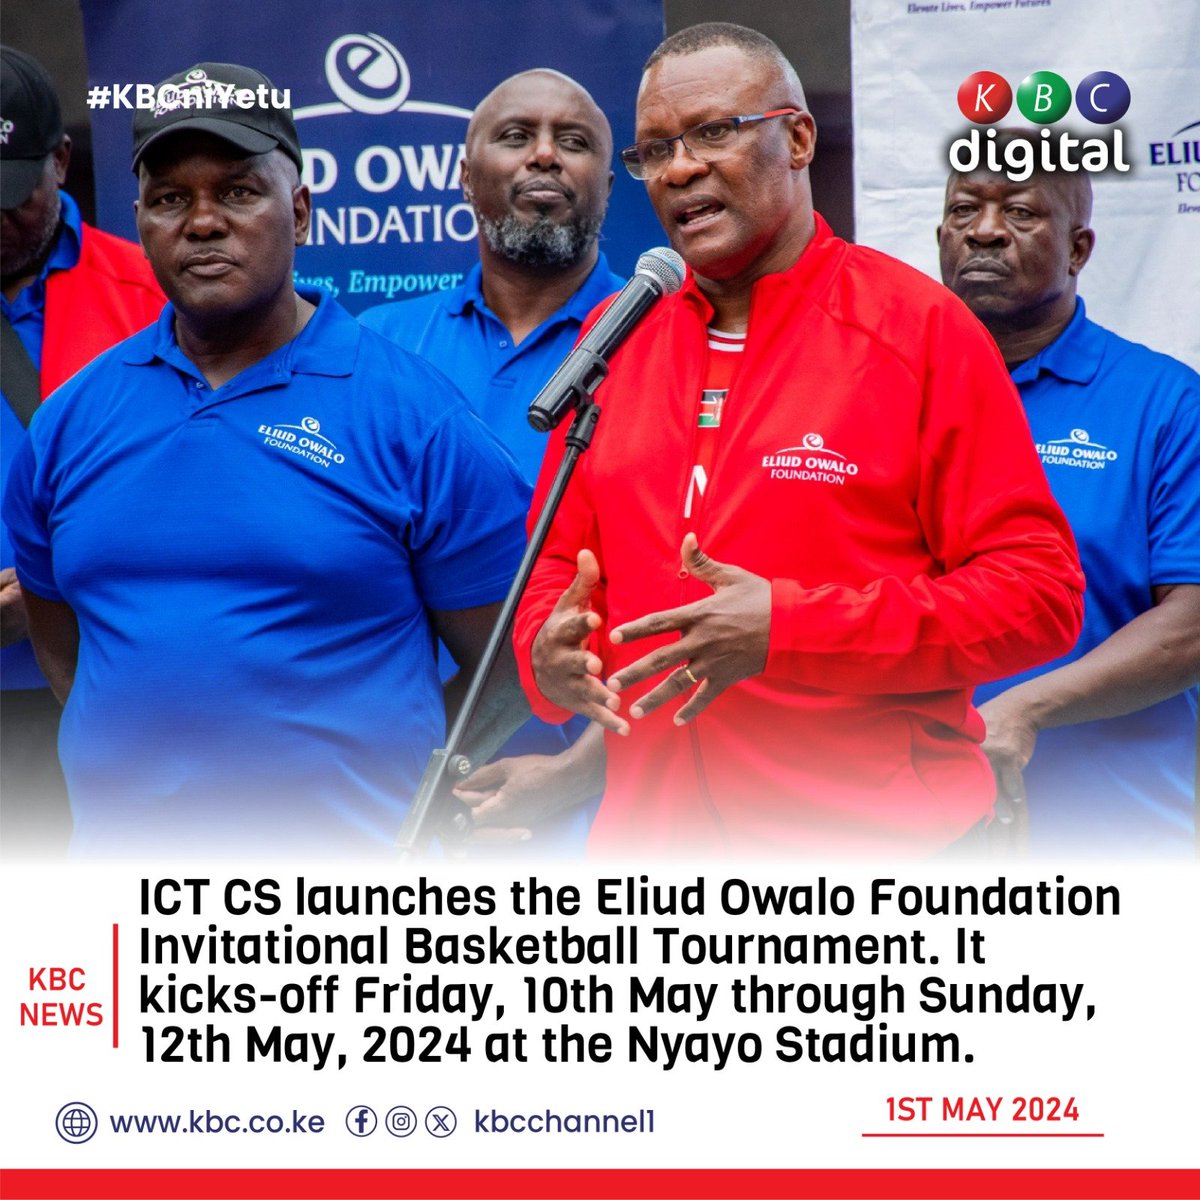 ICT CS launches the Eliud Owalo Foundation Invitational Basketball Tournament which will kick-off on Friday, 10th May through Sunday, 12th May, 2024 at the Nyayo Stadium.
#KBCniYetu ^RO